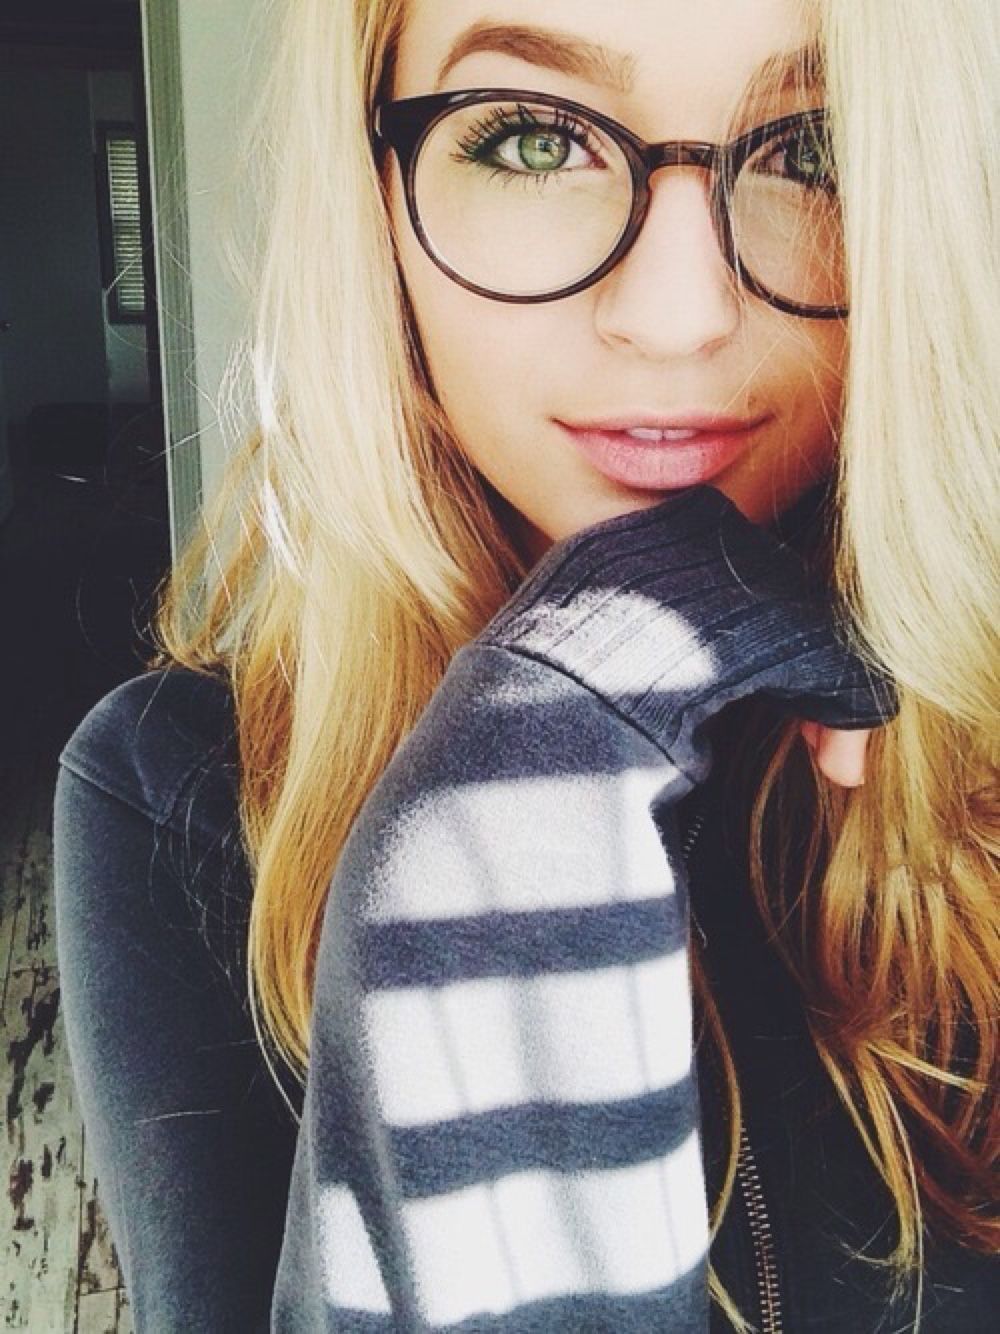 this girl victoire weasley wear a cool plastic glasses with a classic panto shape 1